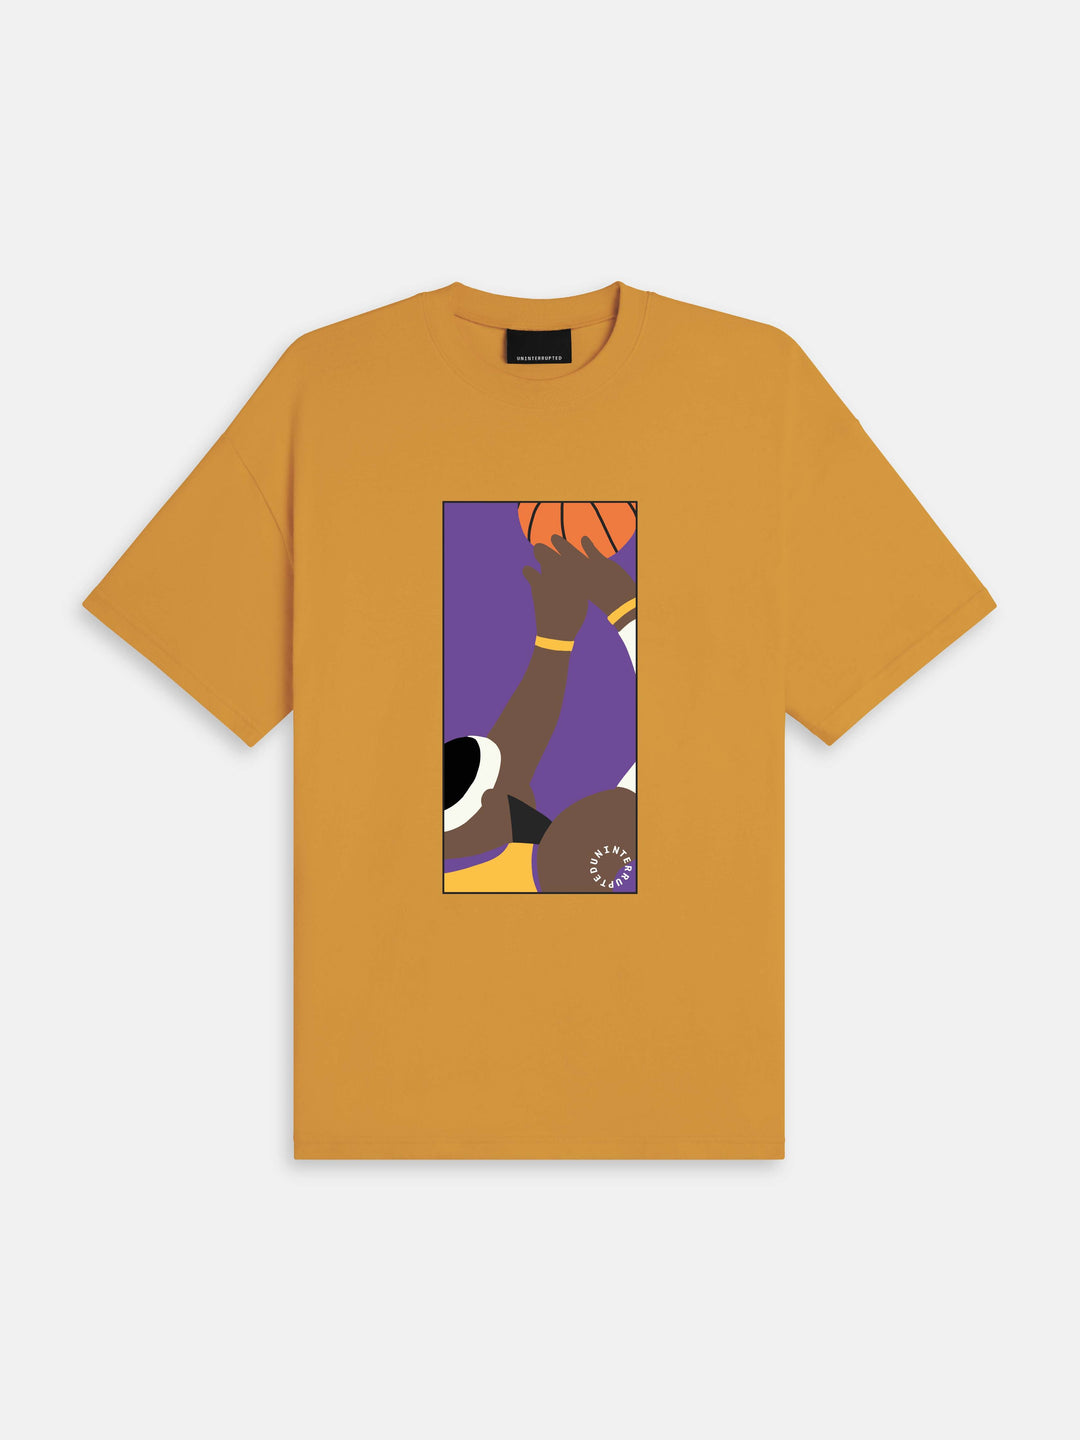 King James Shooting Record Tee Gold - gold short sleeve t shirt with a lebron james graphic on the front